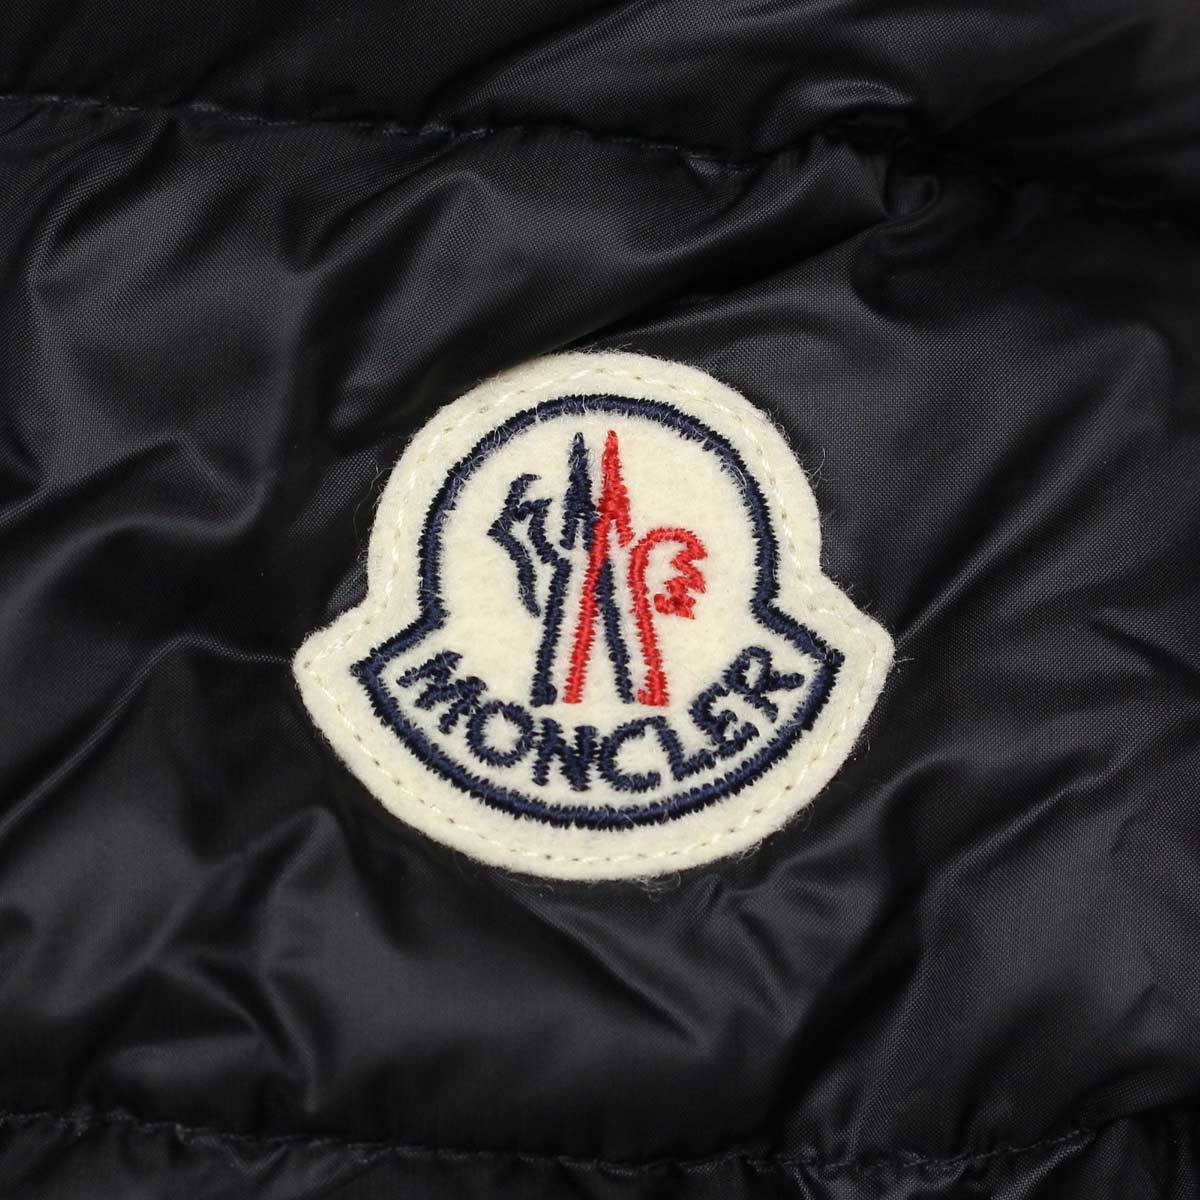 [100+] Moncler Wallpapers | Wallpapers.com